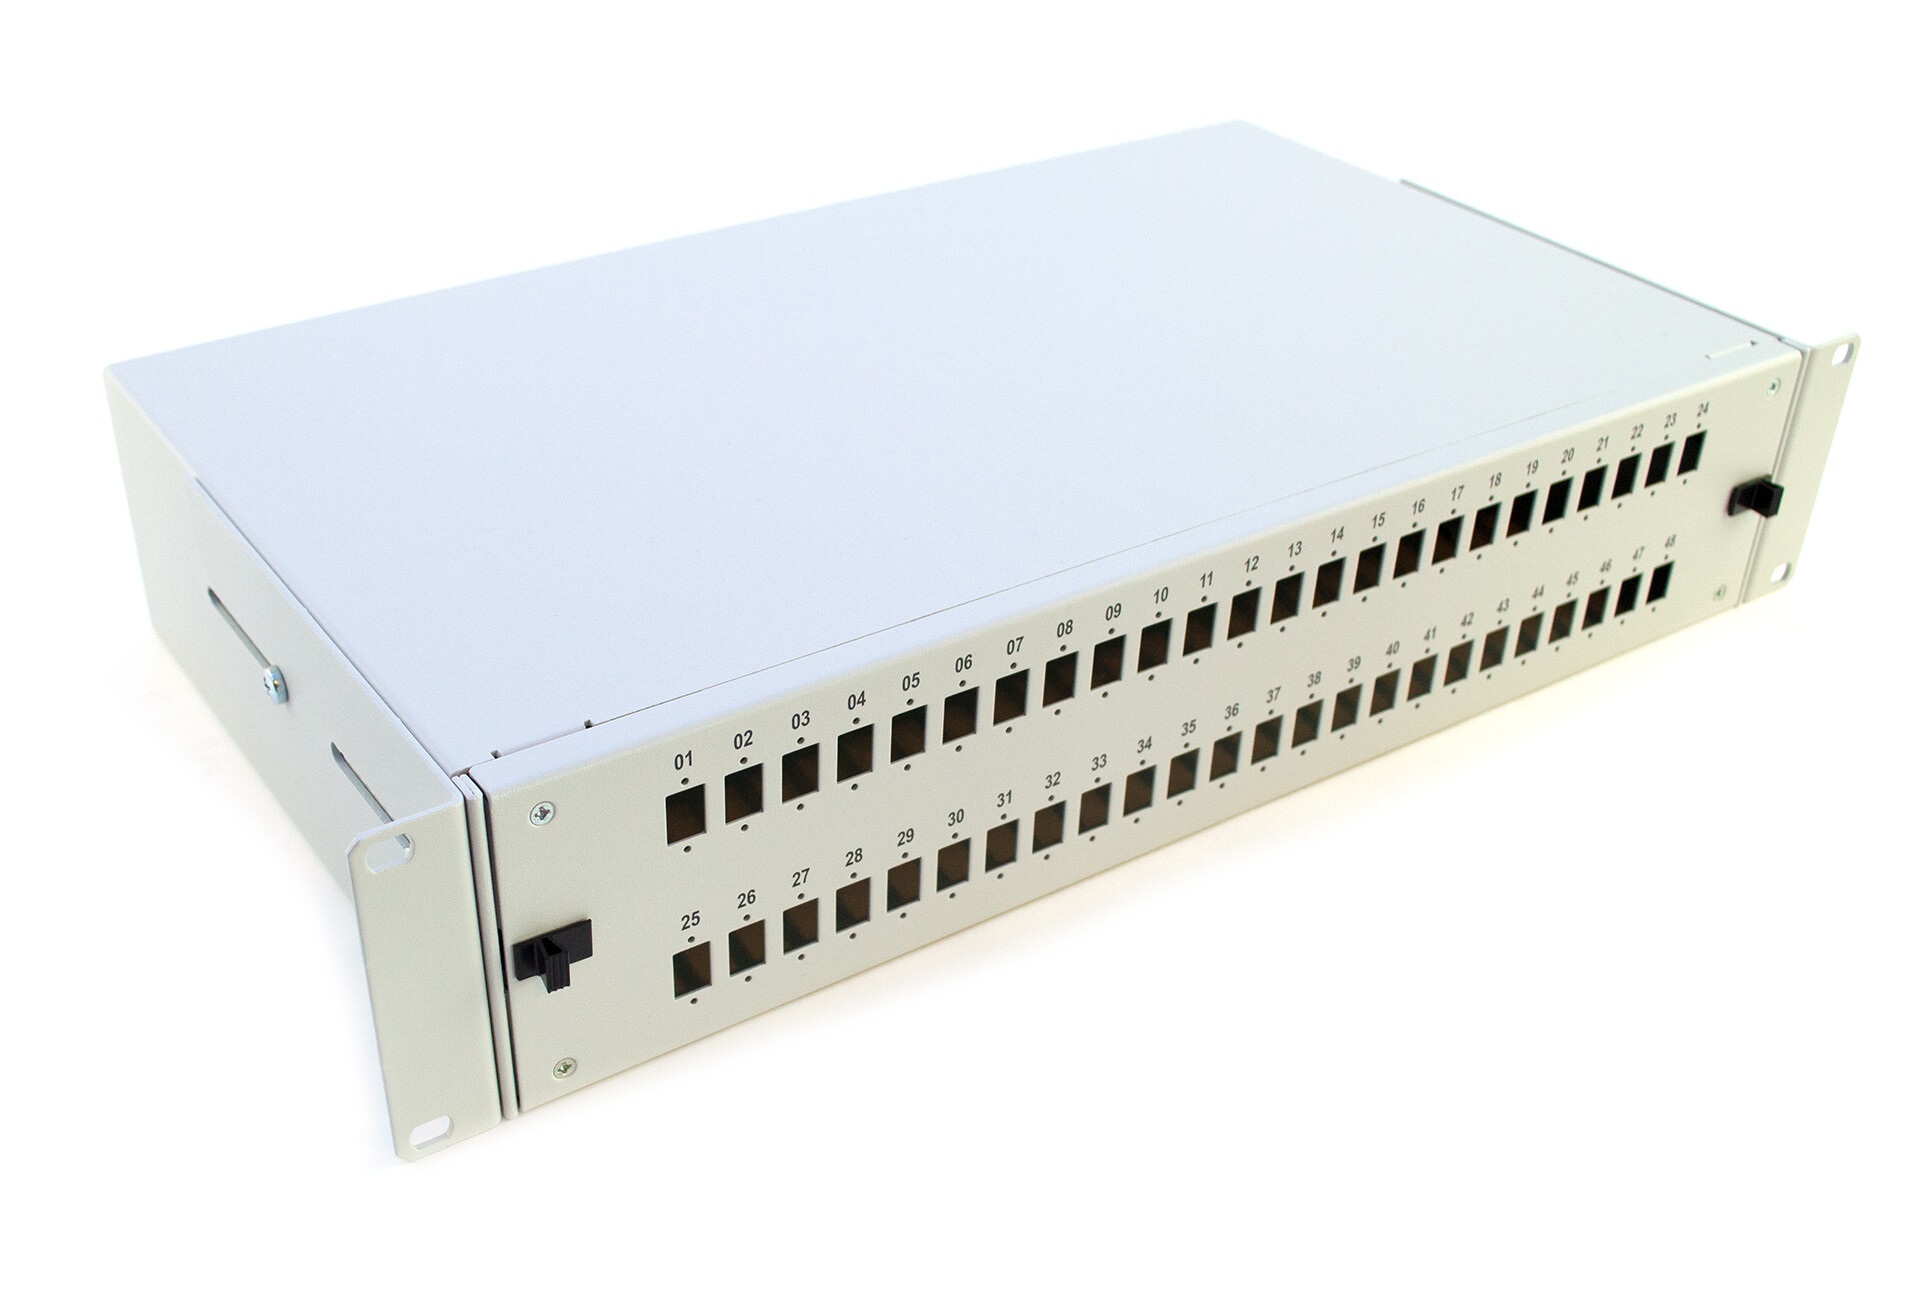 Empty 2U patch panel with E2000 front panel